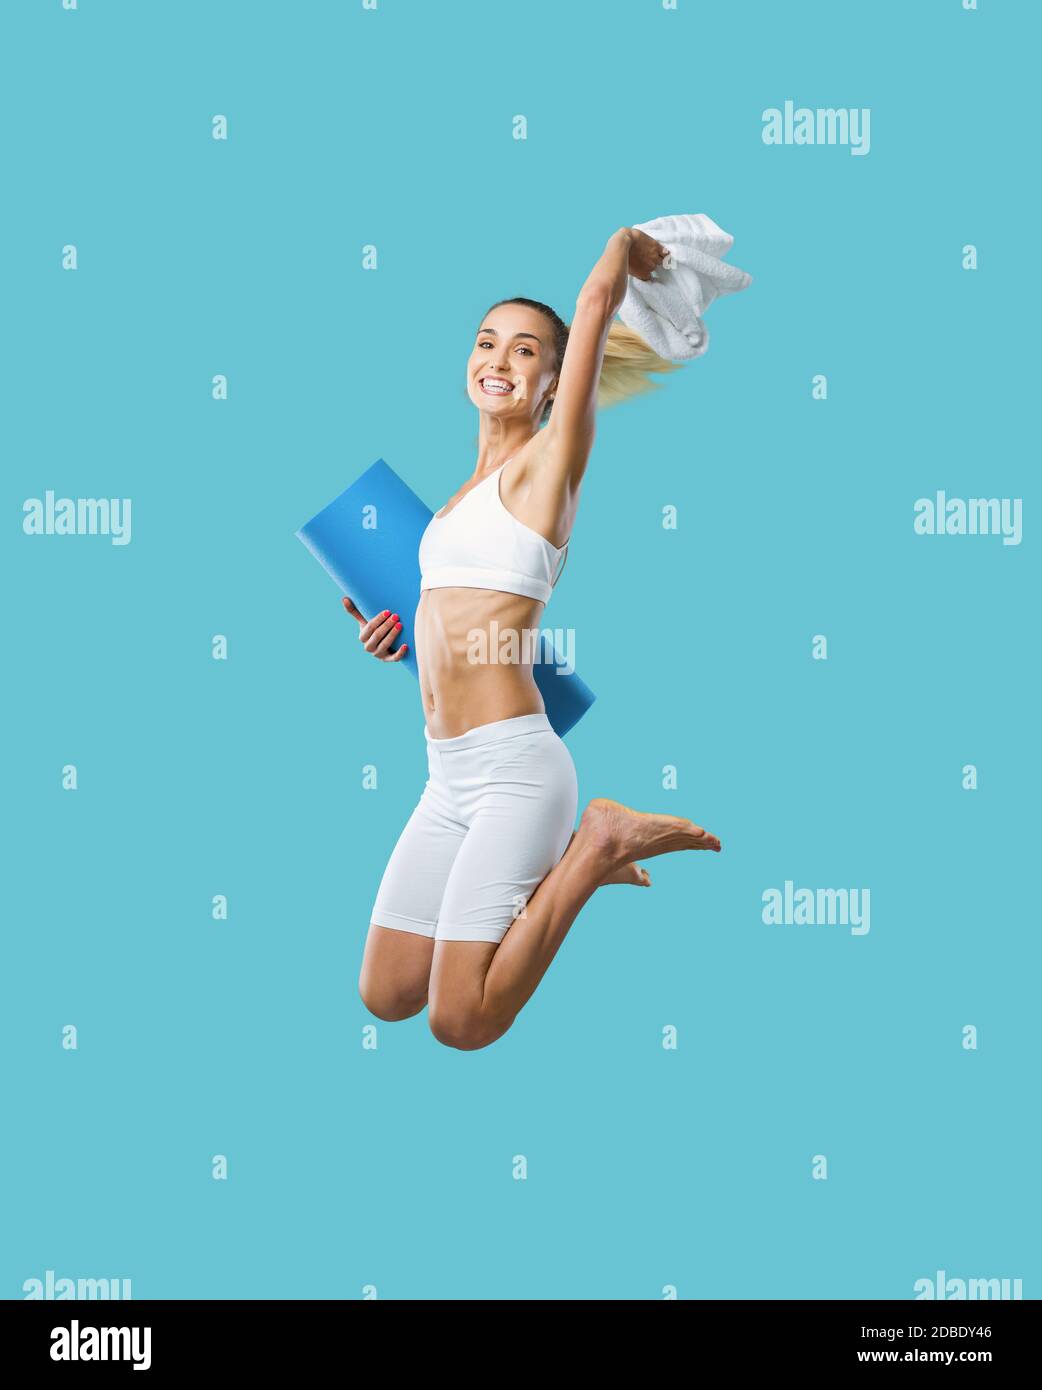 Cheerful slim woman working out and jumping, she is holding a mat, healthy lifestyle and weight loss concept Stock Photo